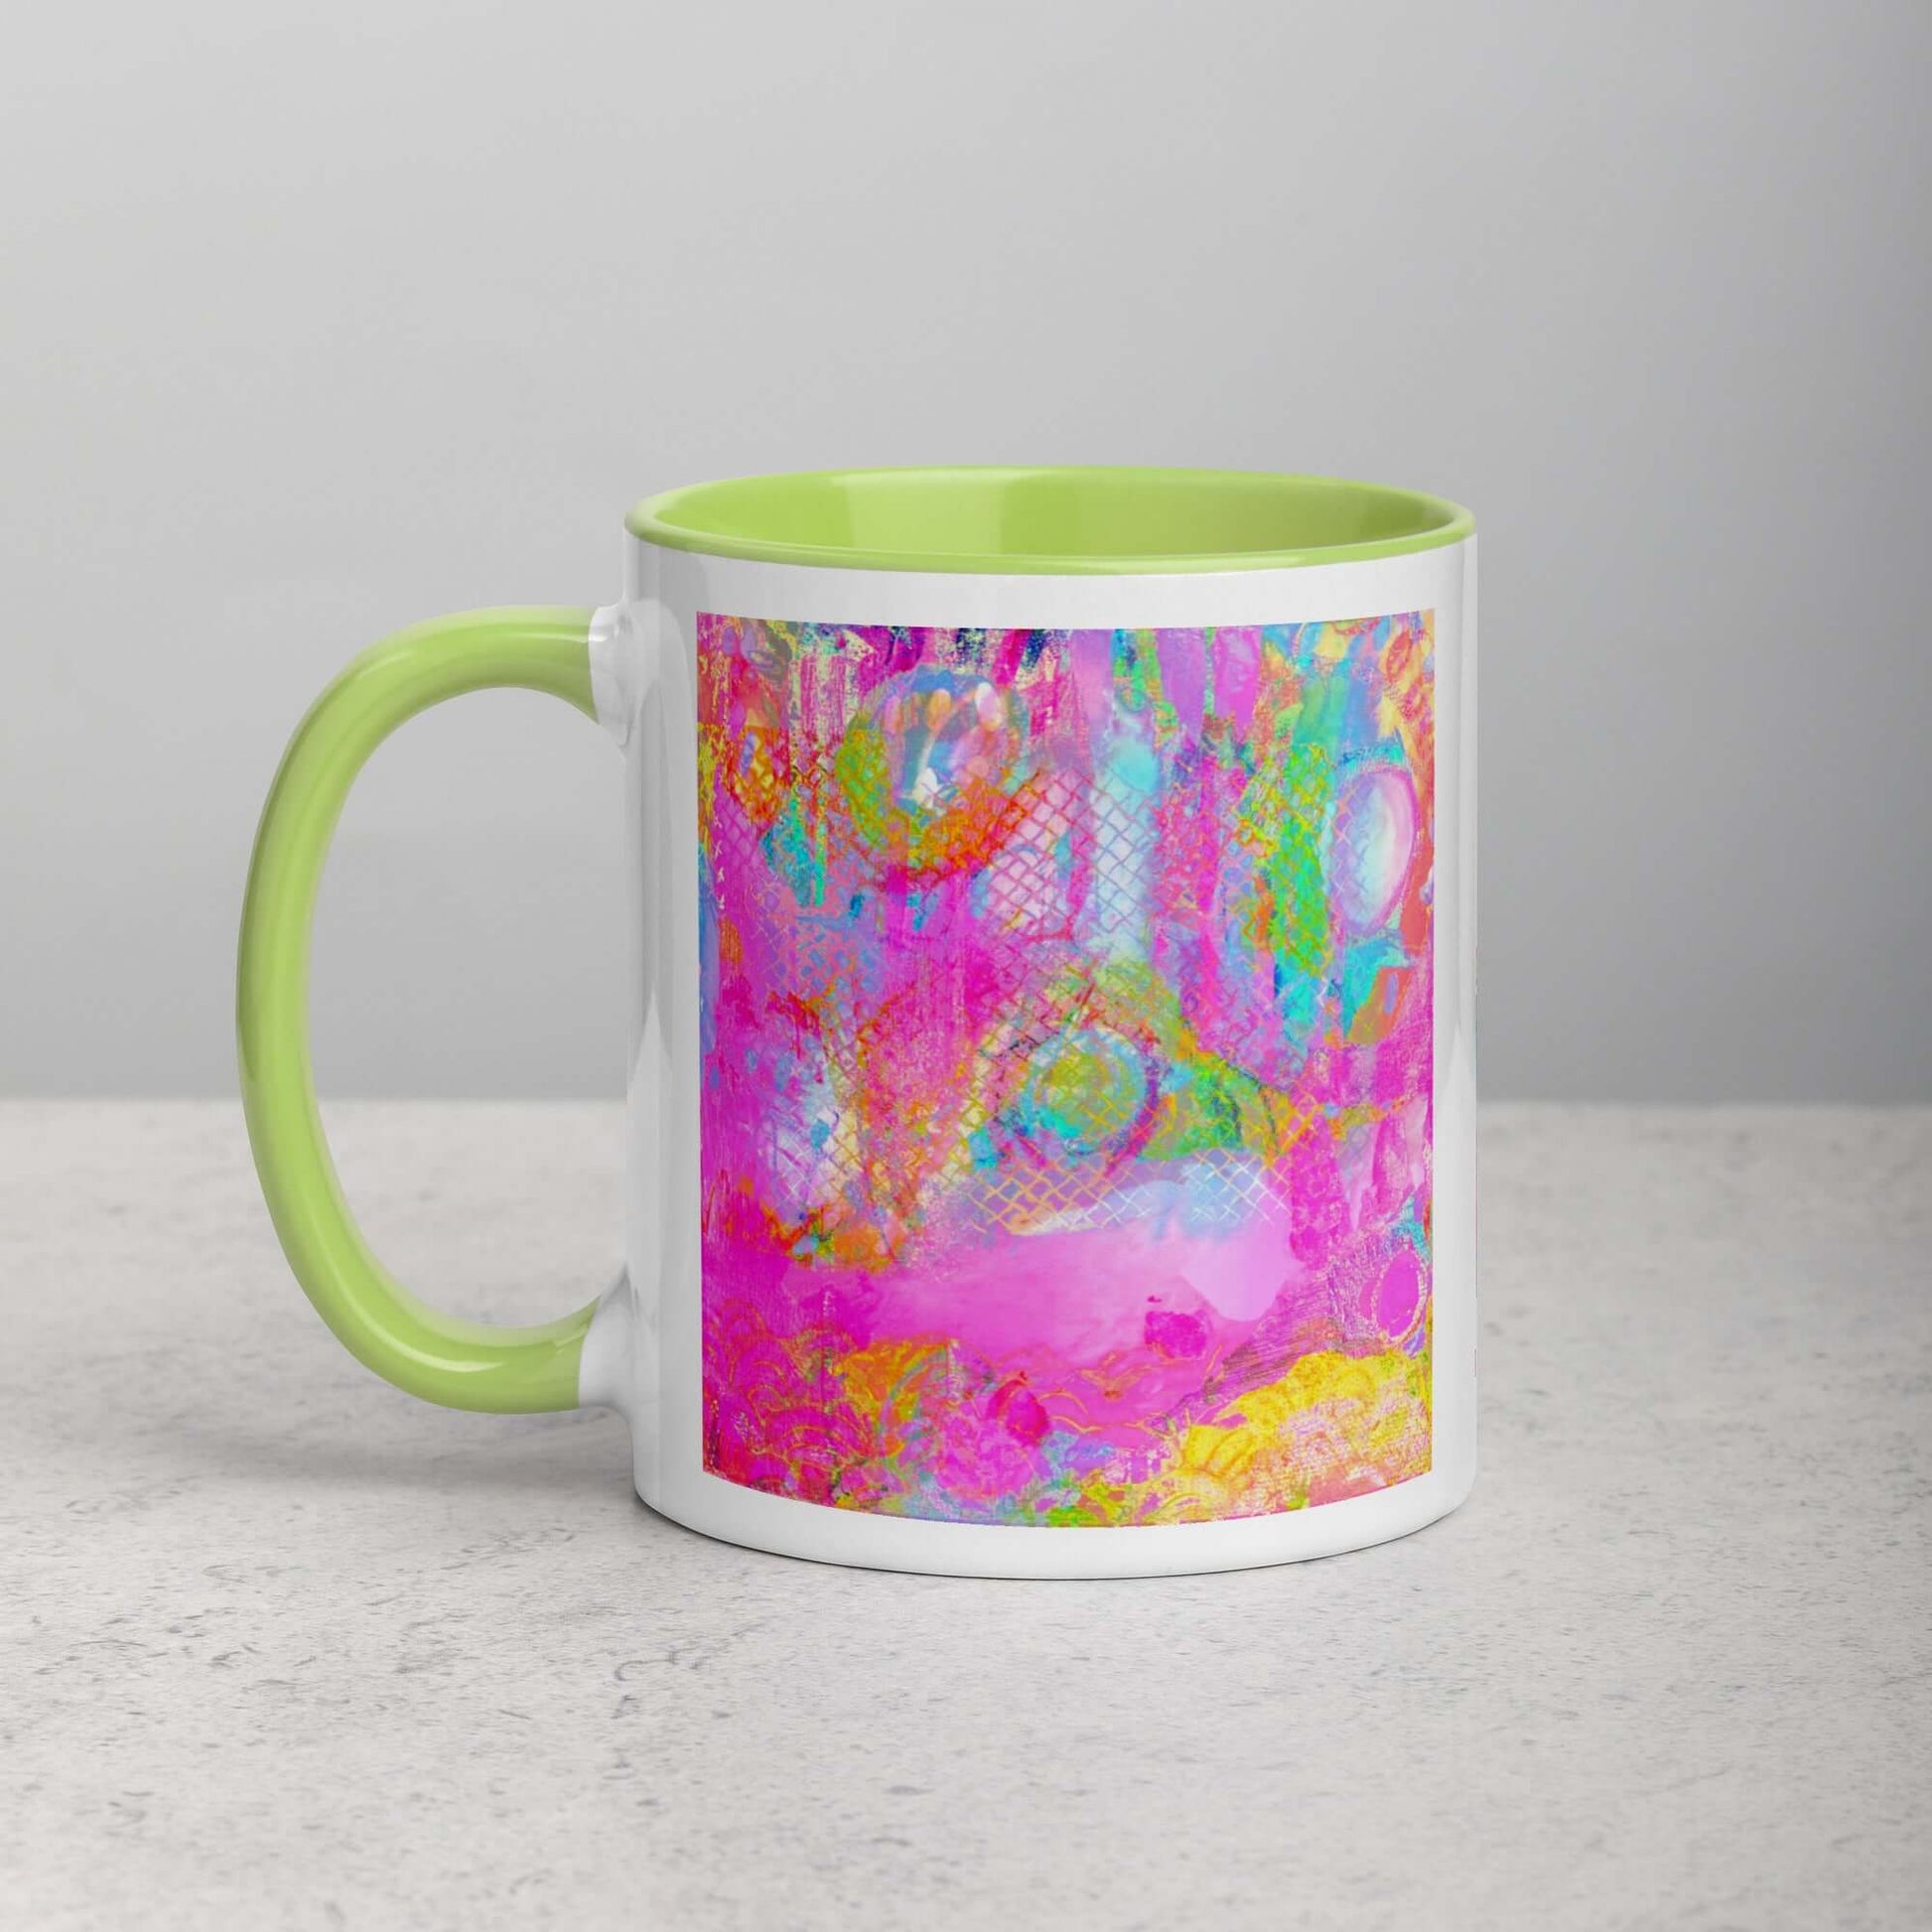  Drippy Pink “Candyland” Abstract Art Mug with Lime Green Color Inside Left Handed Front View